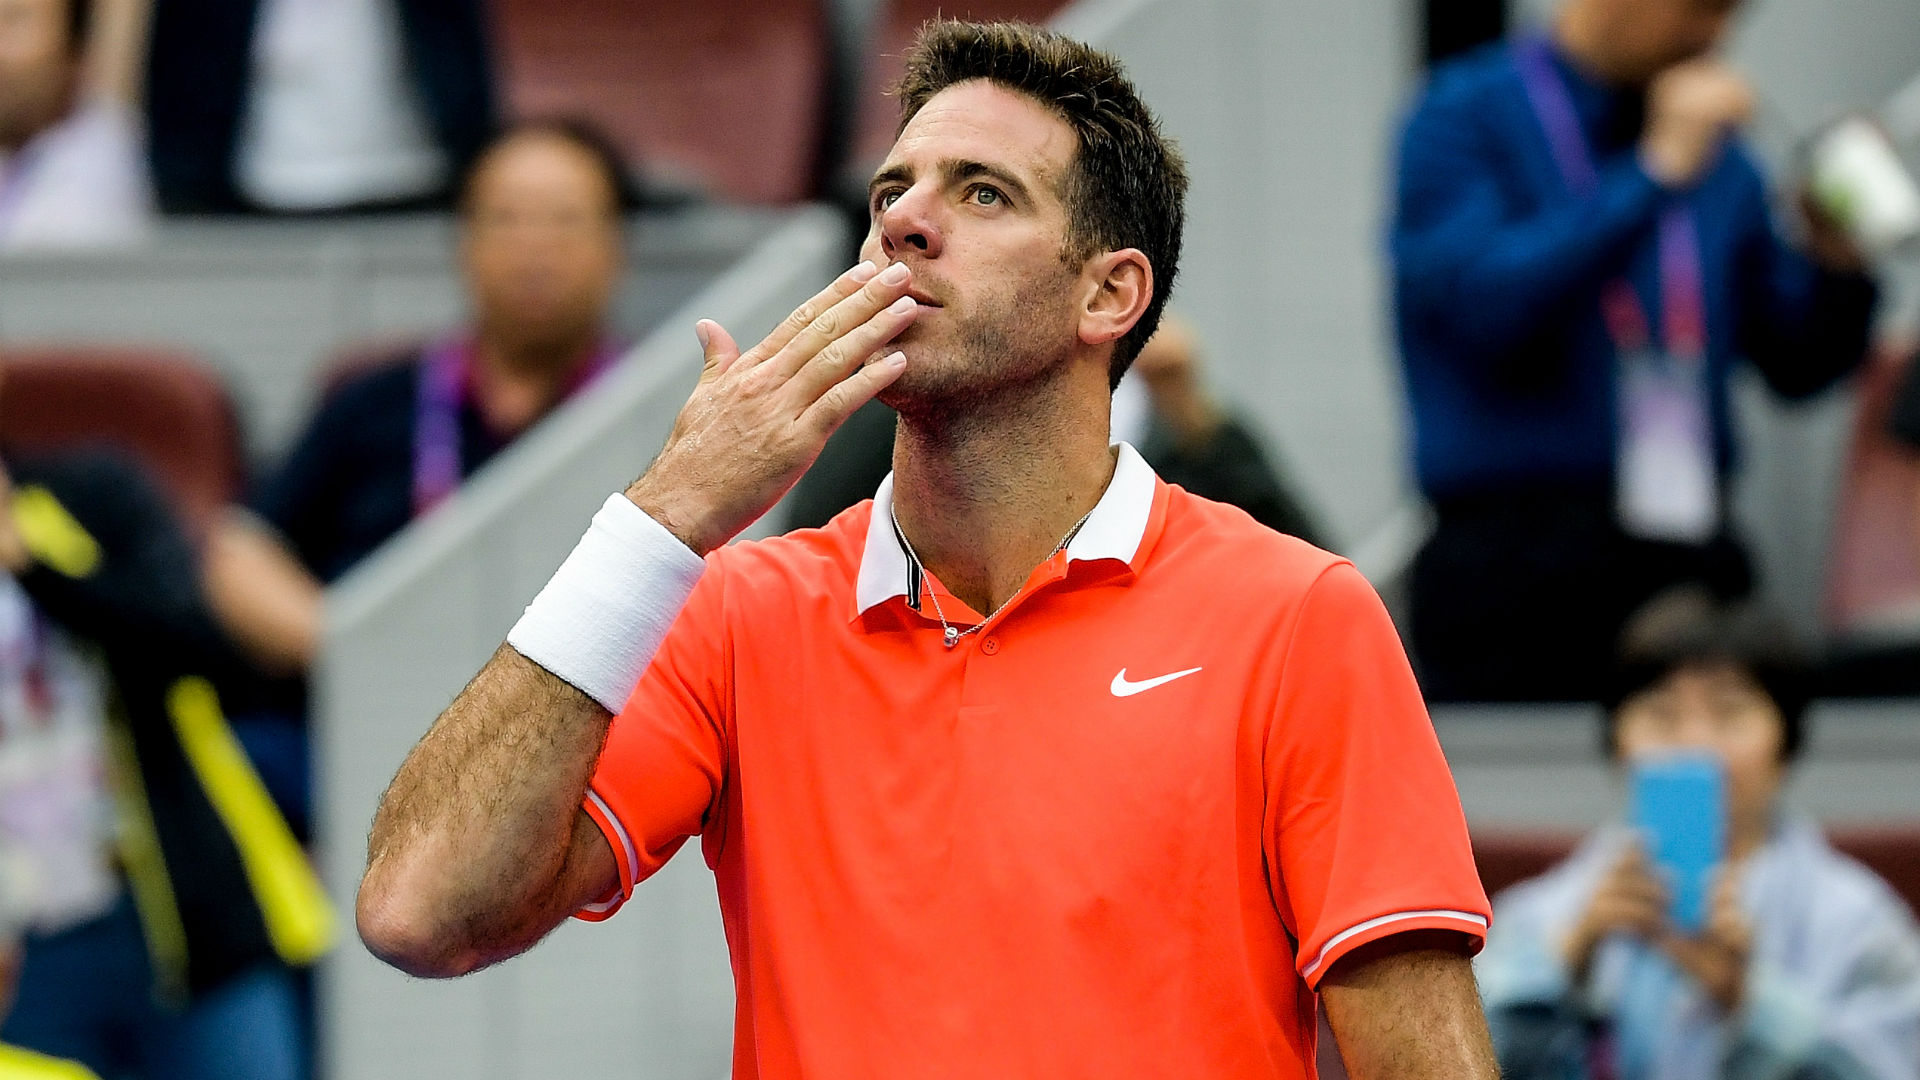 Fabio Fognini's withdrawal from the China Open means Juan Martin del Potro is into his sixth final of 2018.